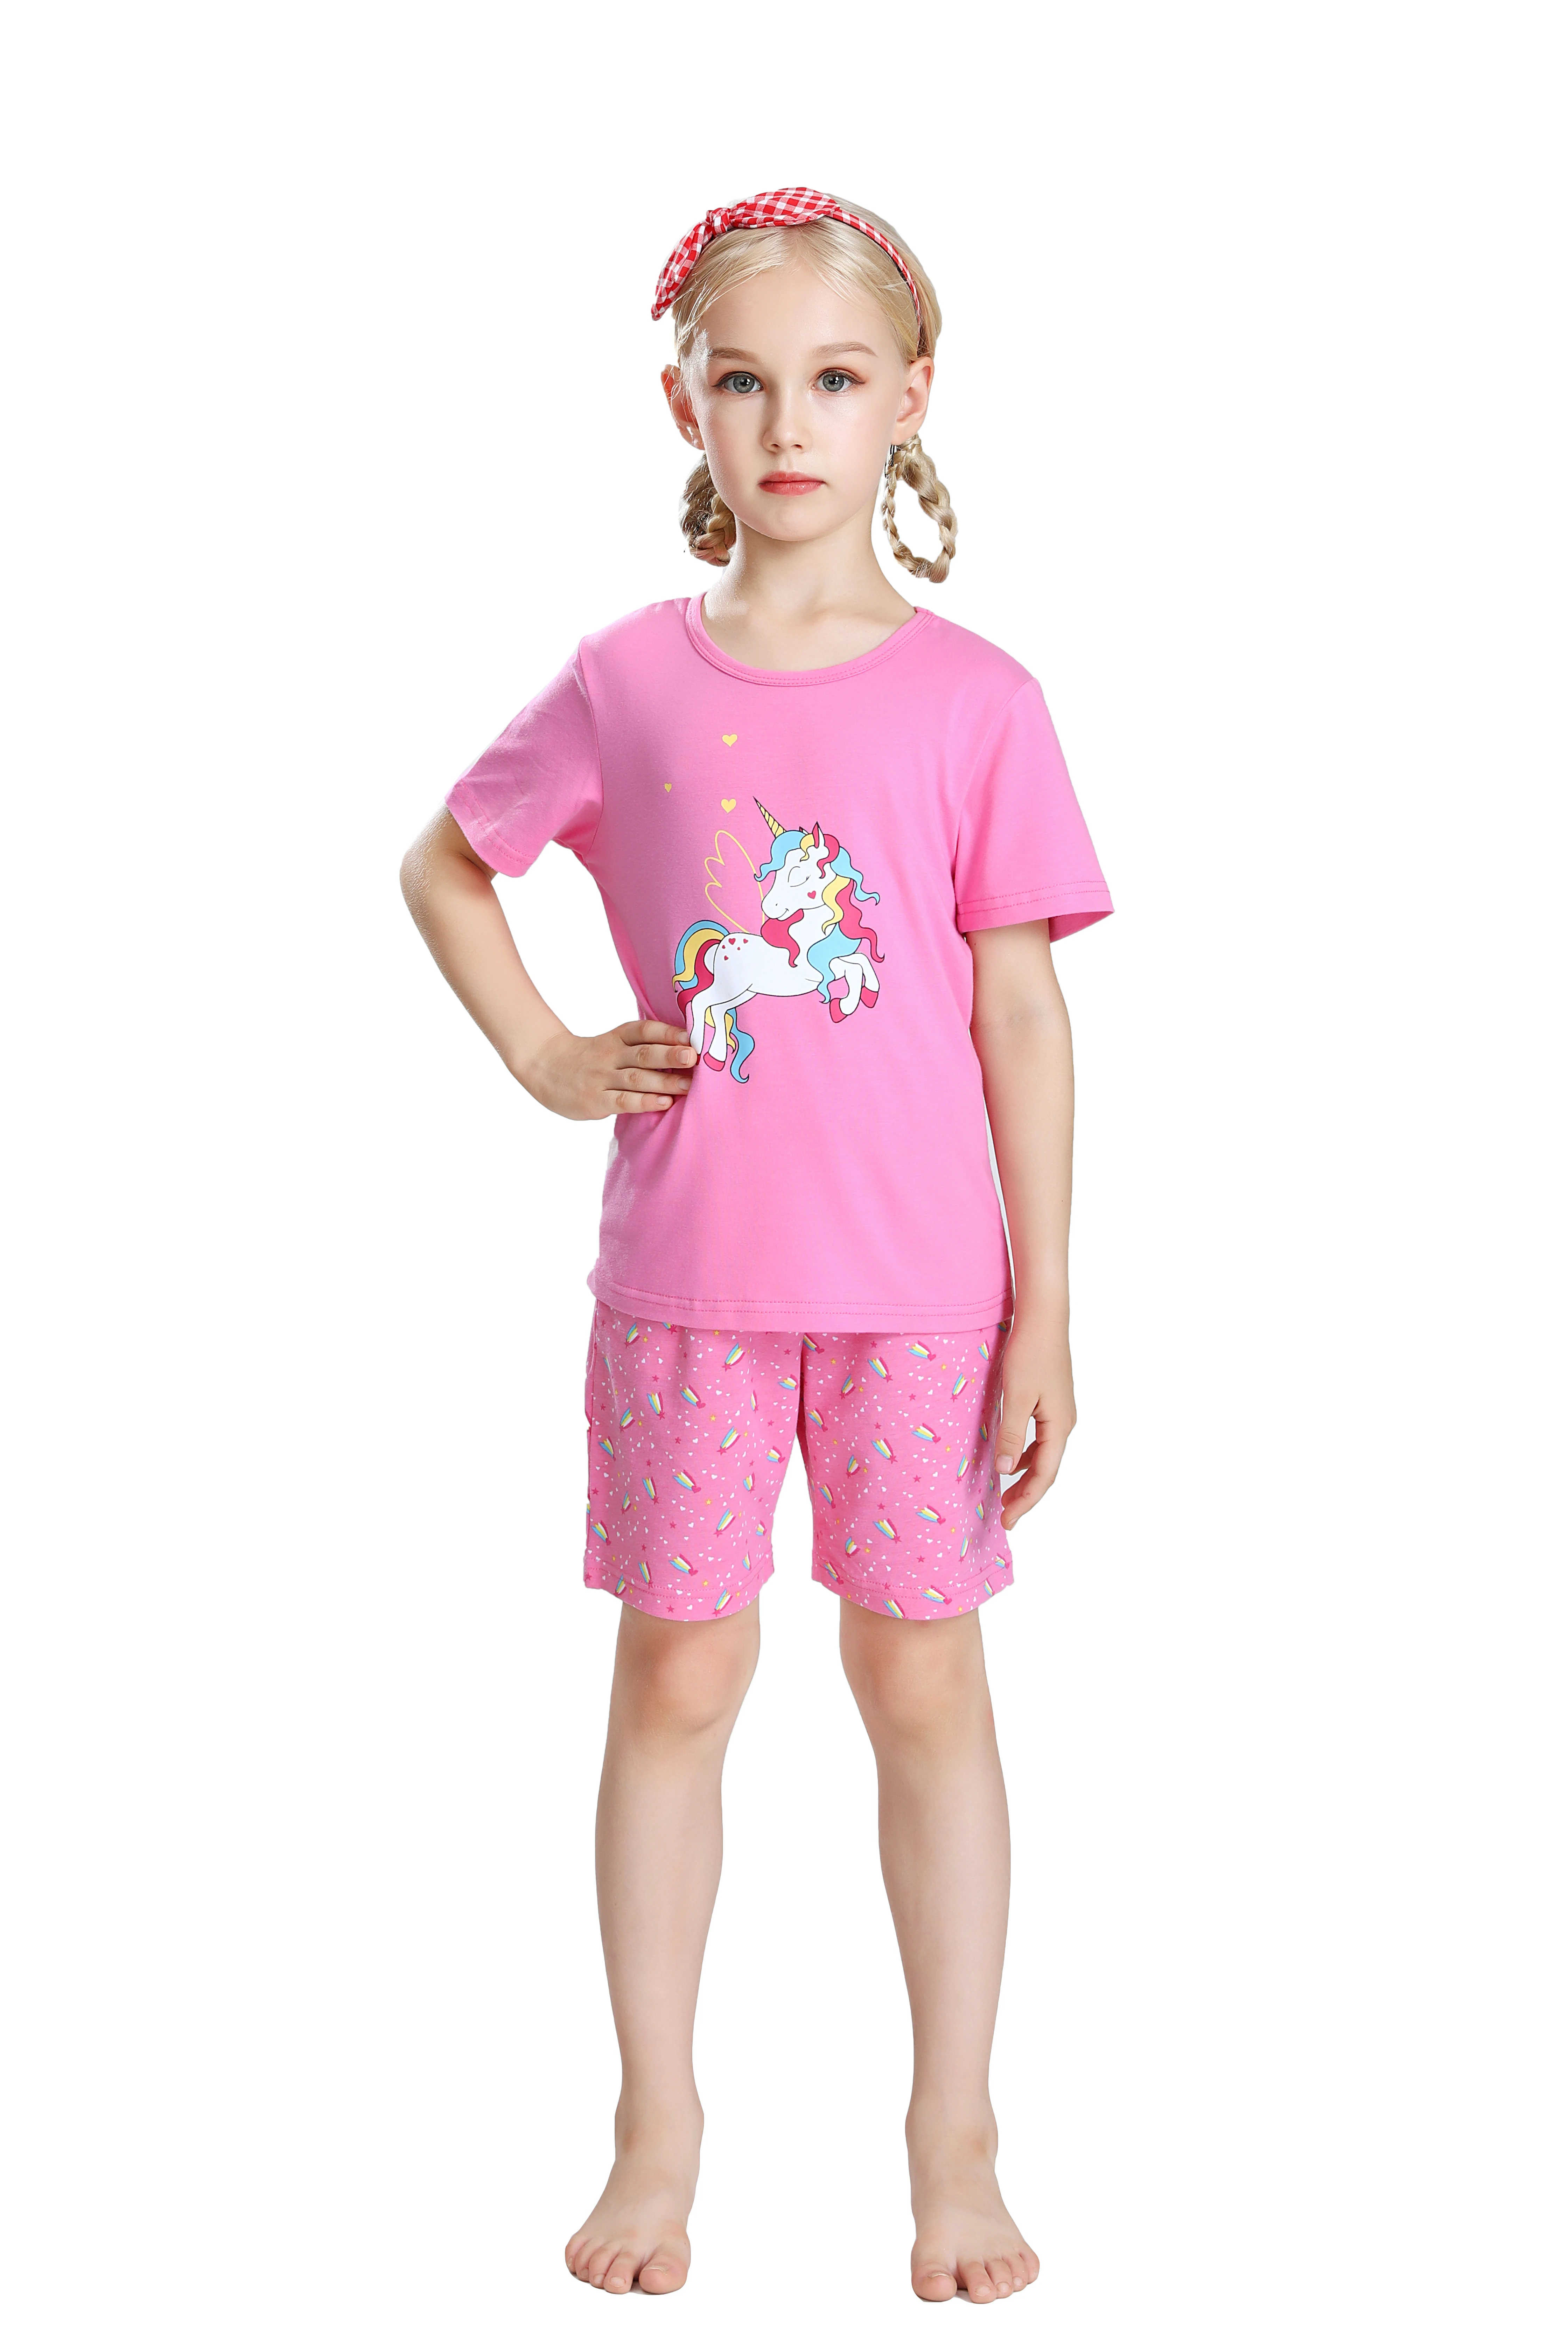 SANQIANG Lightweight Unicorn Tee for Girls Quality Cotton 2Pcs Outfit Summer T-Shirt & Shorts r Size 4-12